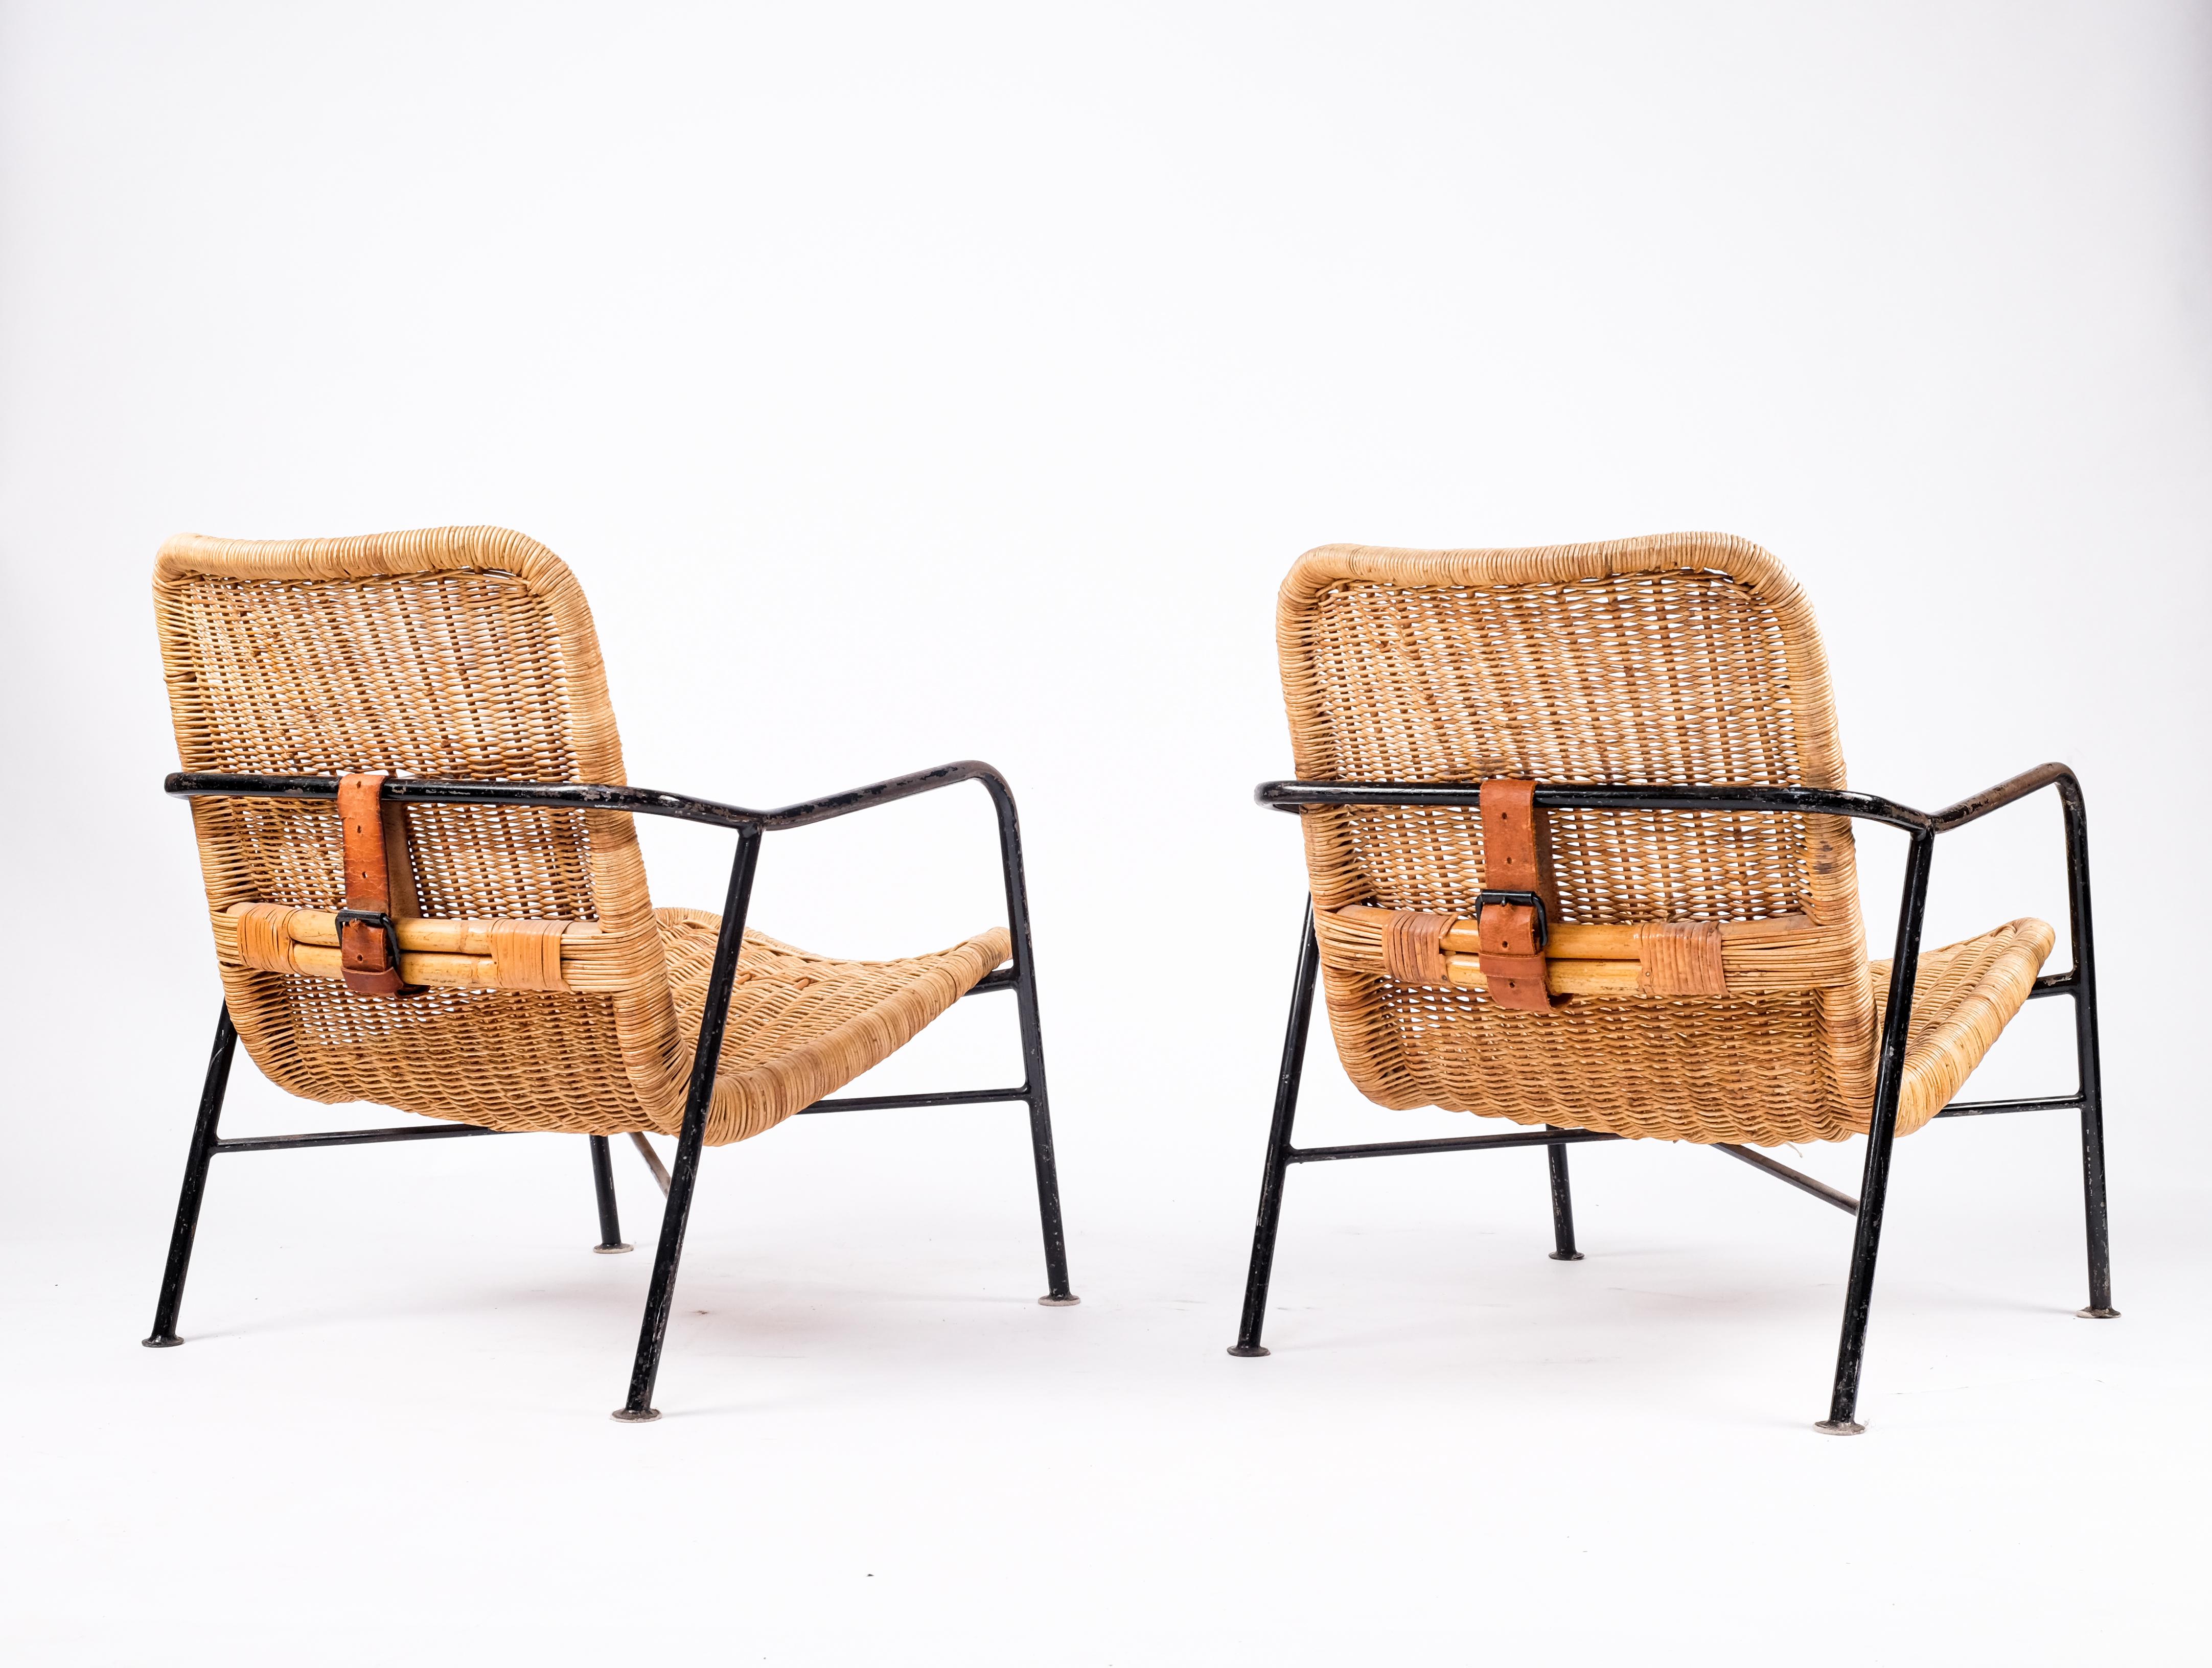 Rare Pair of Swedish Rattan Chairs, 1960s For Sale 3